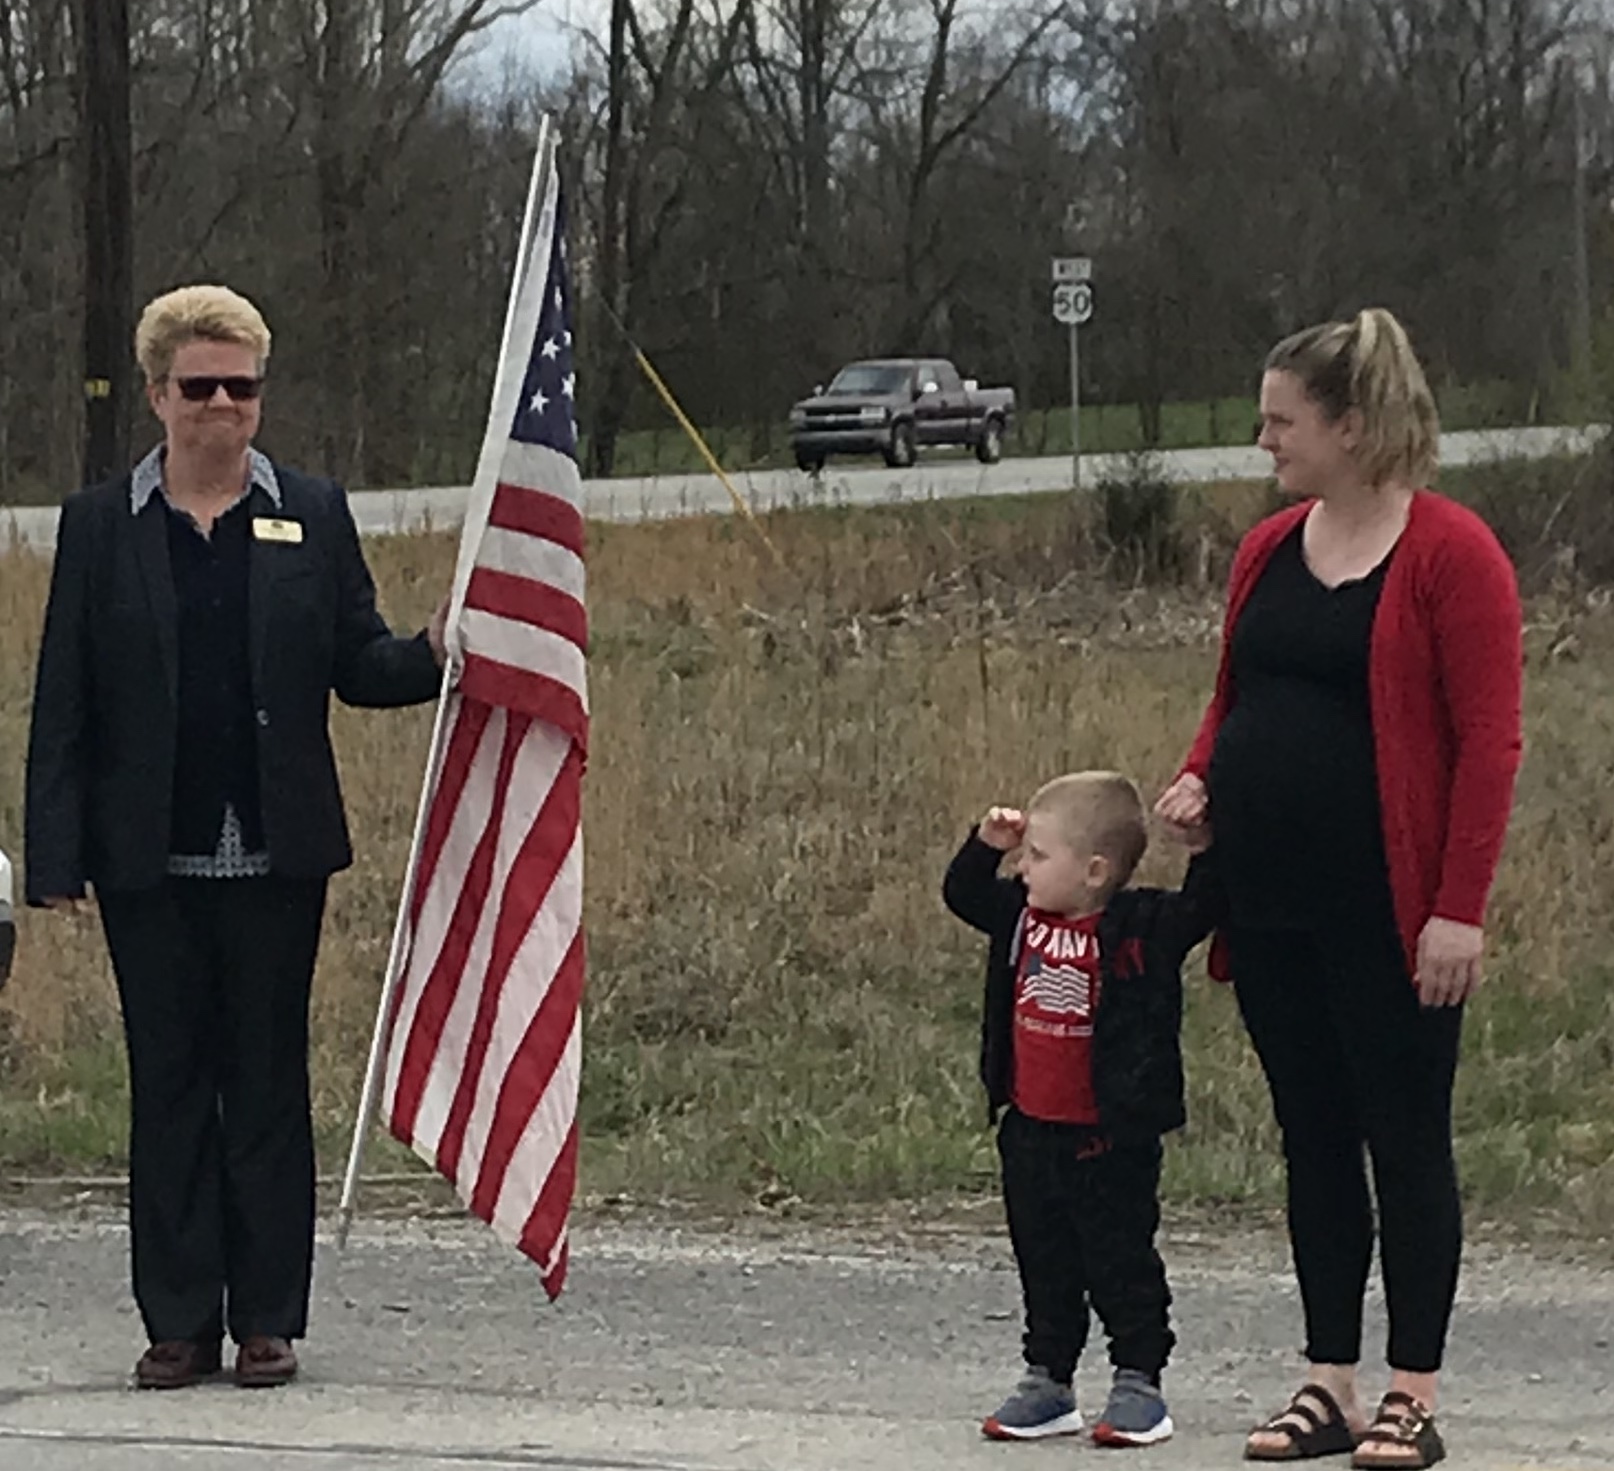 Lawrence County Honors Lance Cpl. Hunter Logan Brown